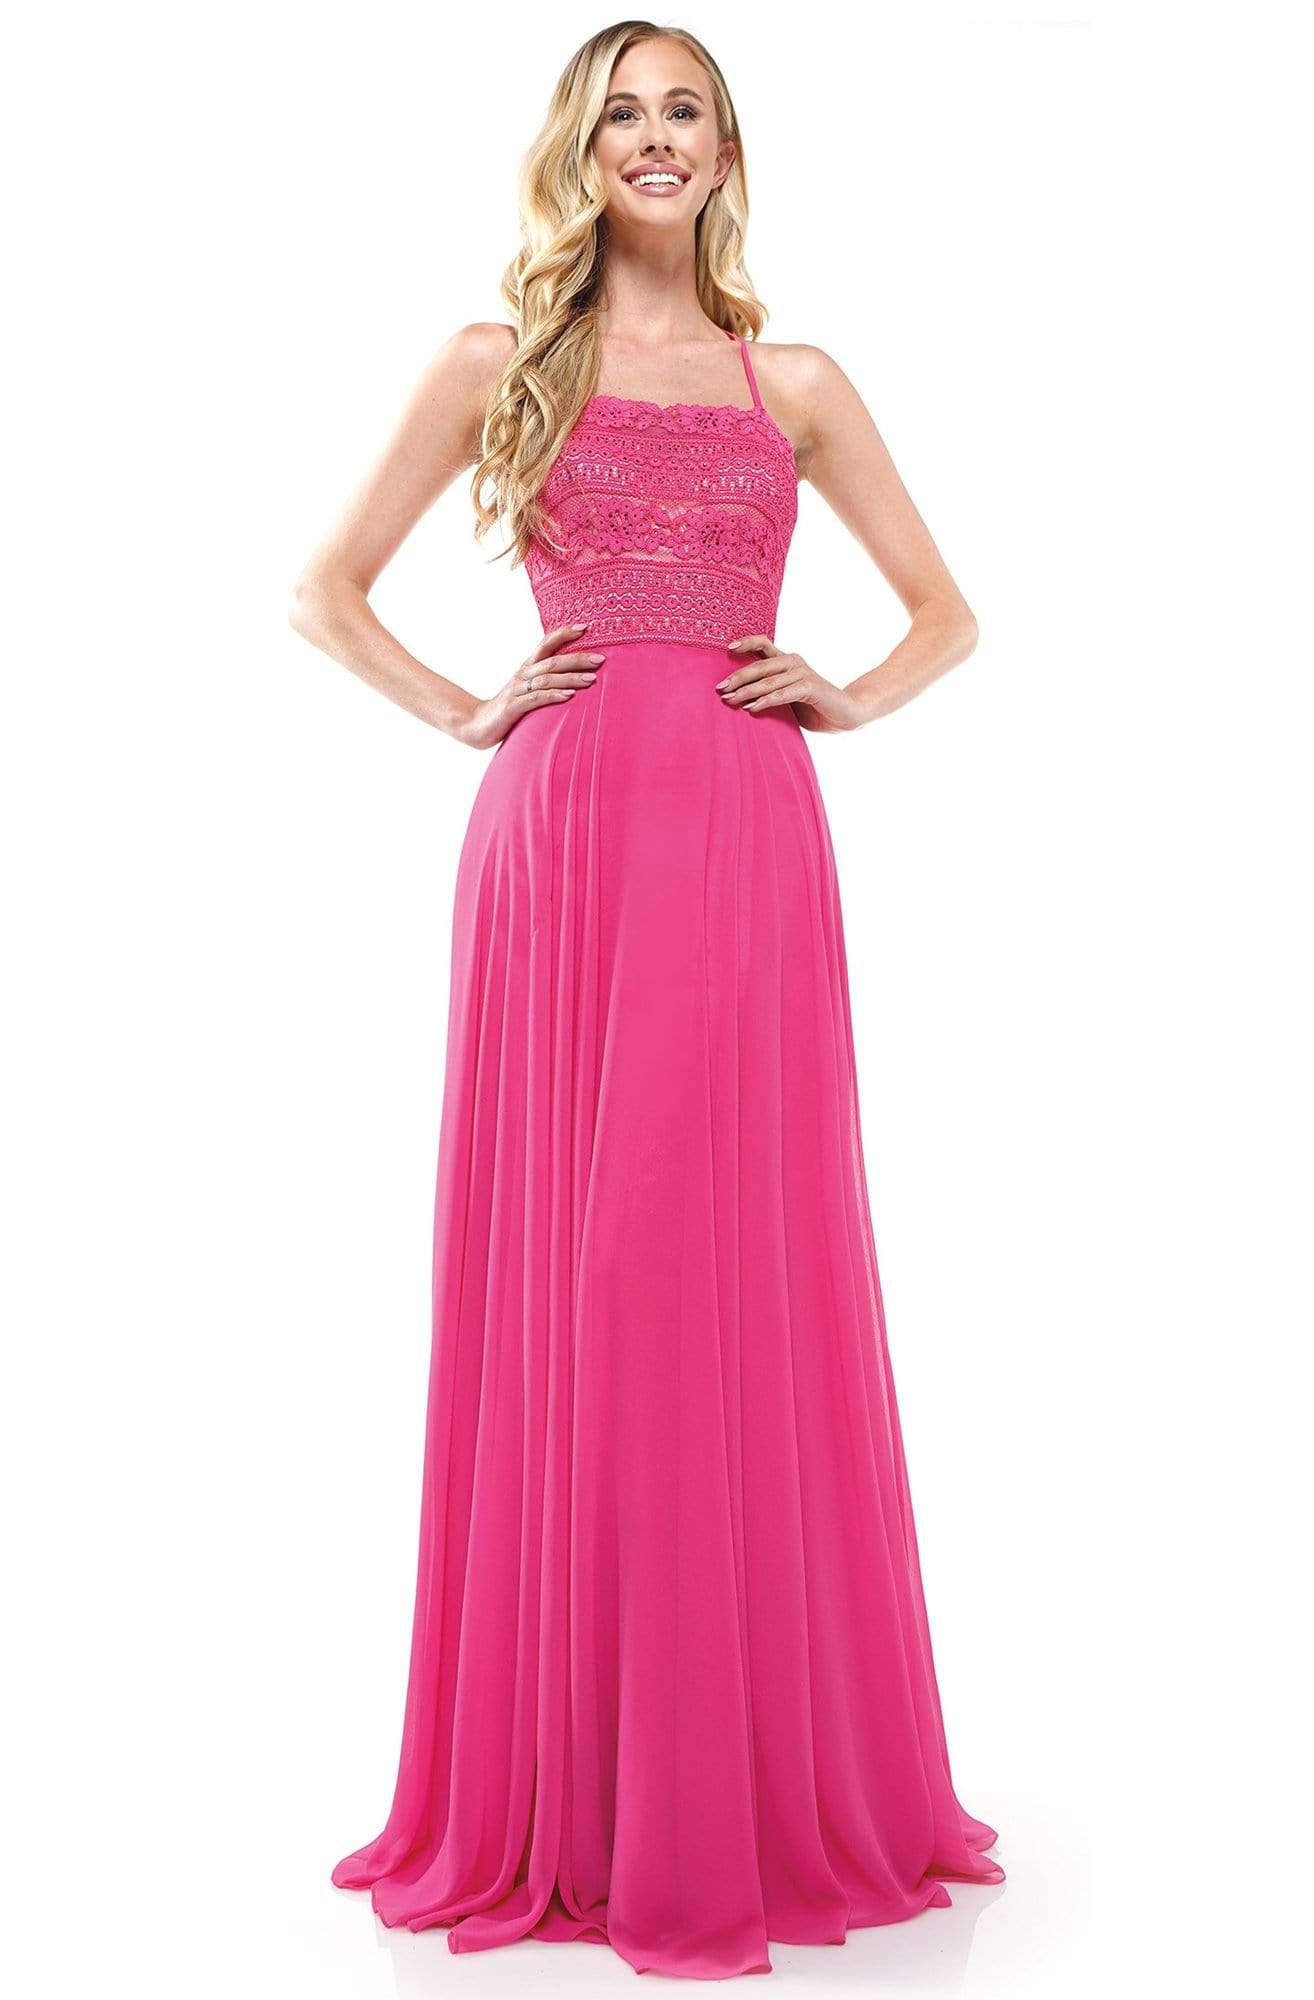 Glow Dress - G889 Strappy Sleeveless Lace Top Chiffon A-Line Gown Prom Dresses 0 / Hot Pink